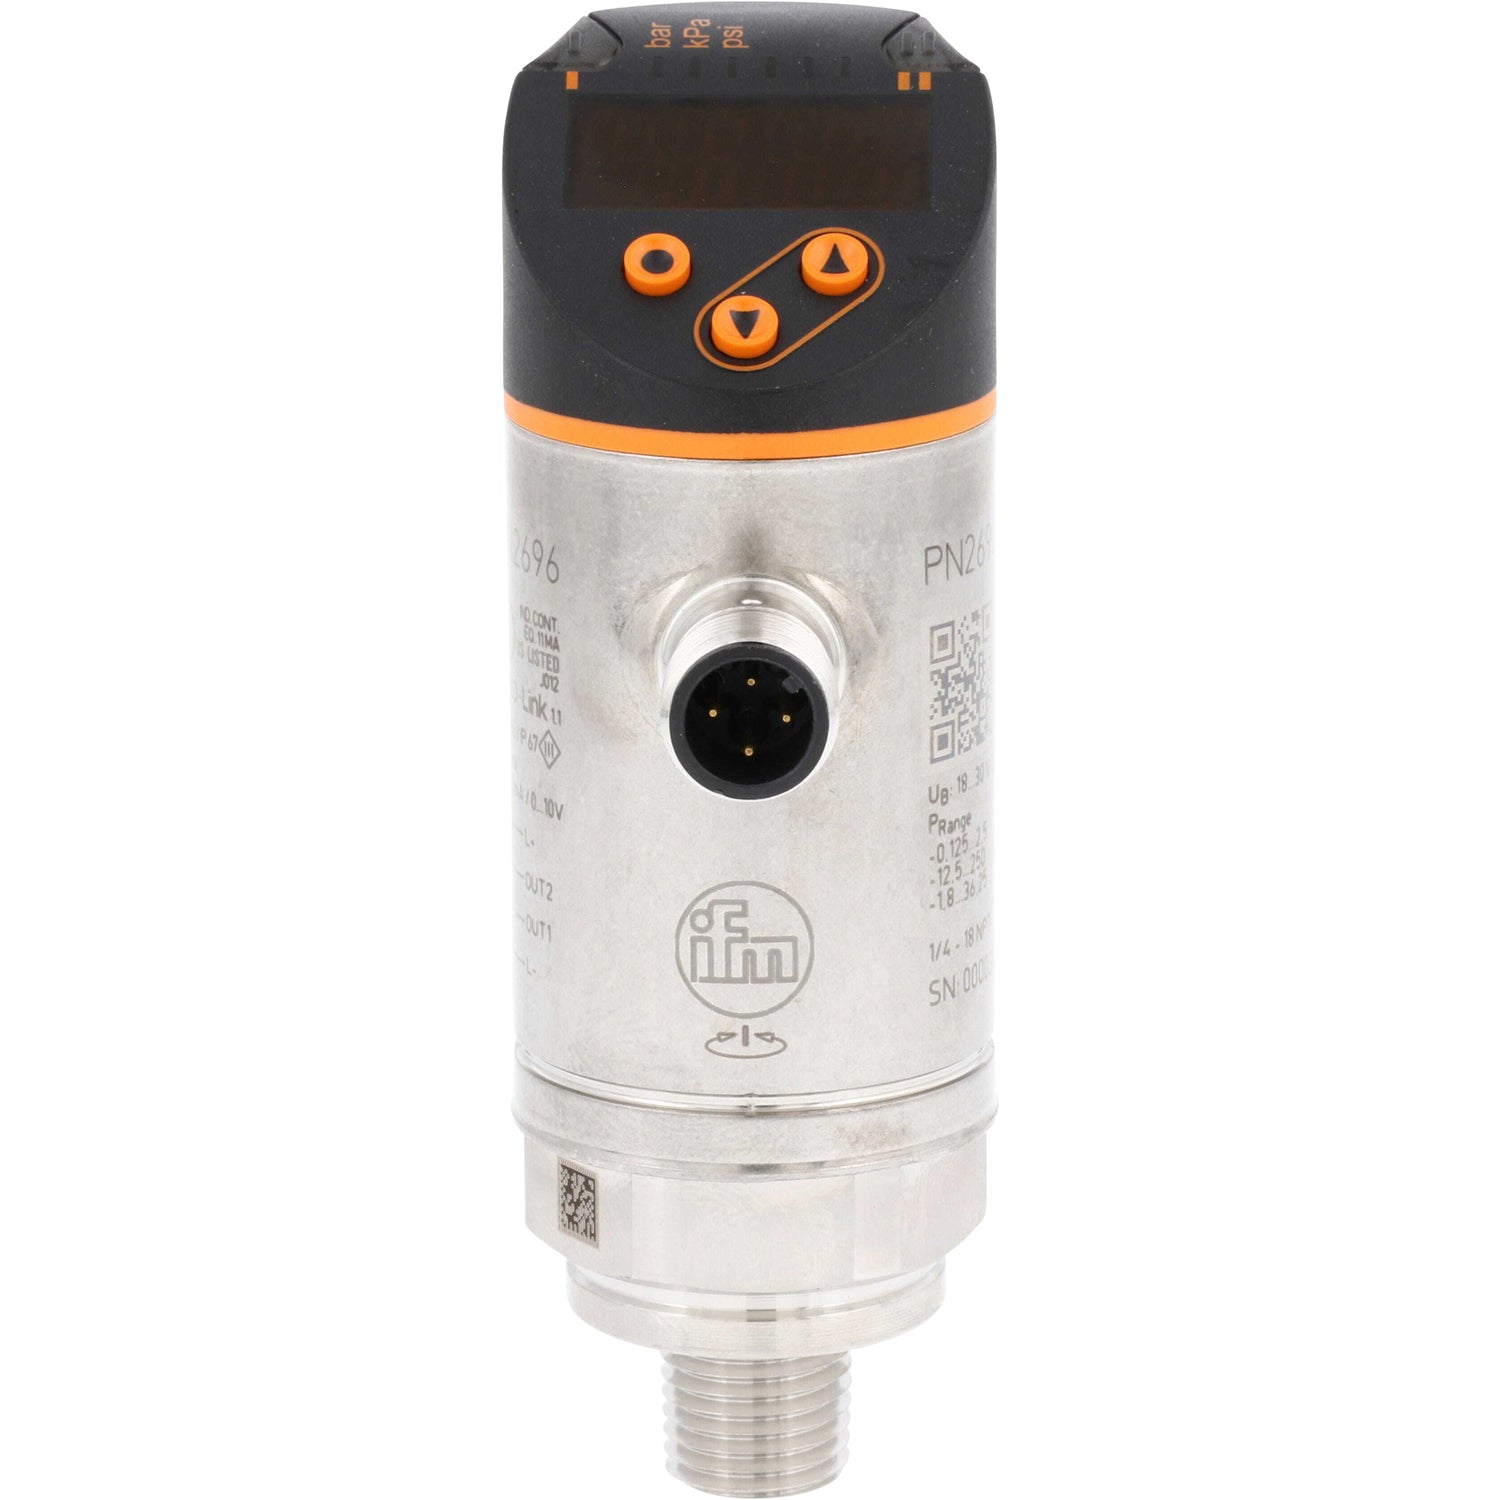 Stainless steel pressure sensor with black and orange plastic top with digital display. Black and orange push buttons and a four pin male connector on the side. This part is shown on a white background. 